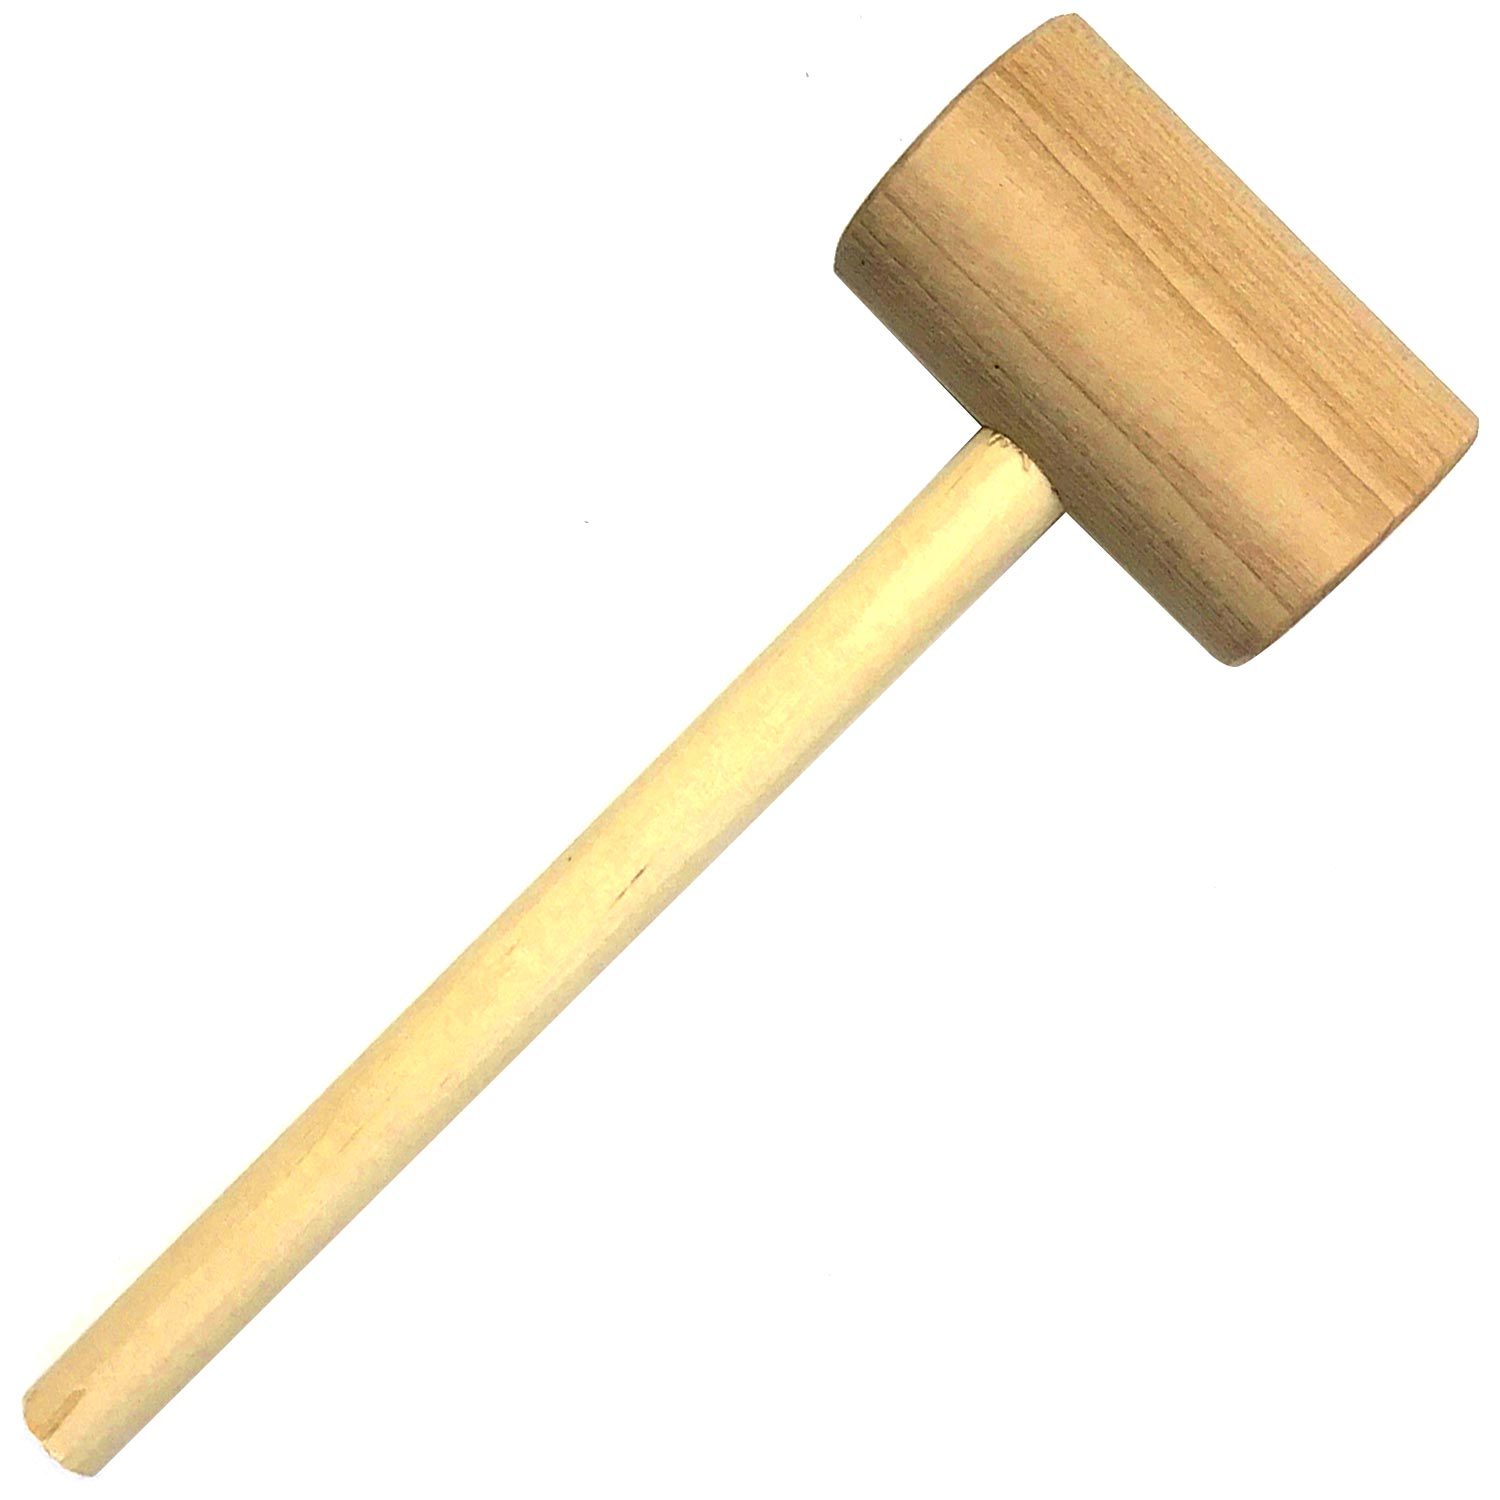 SPORTFISHING PRODUCTS Wooden Crab Mallet